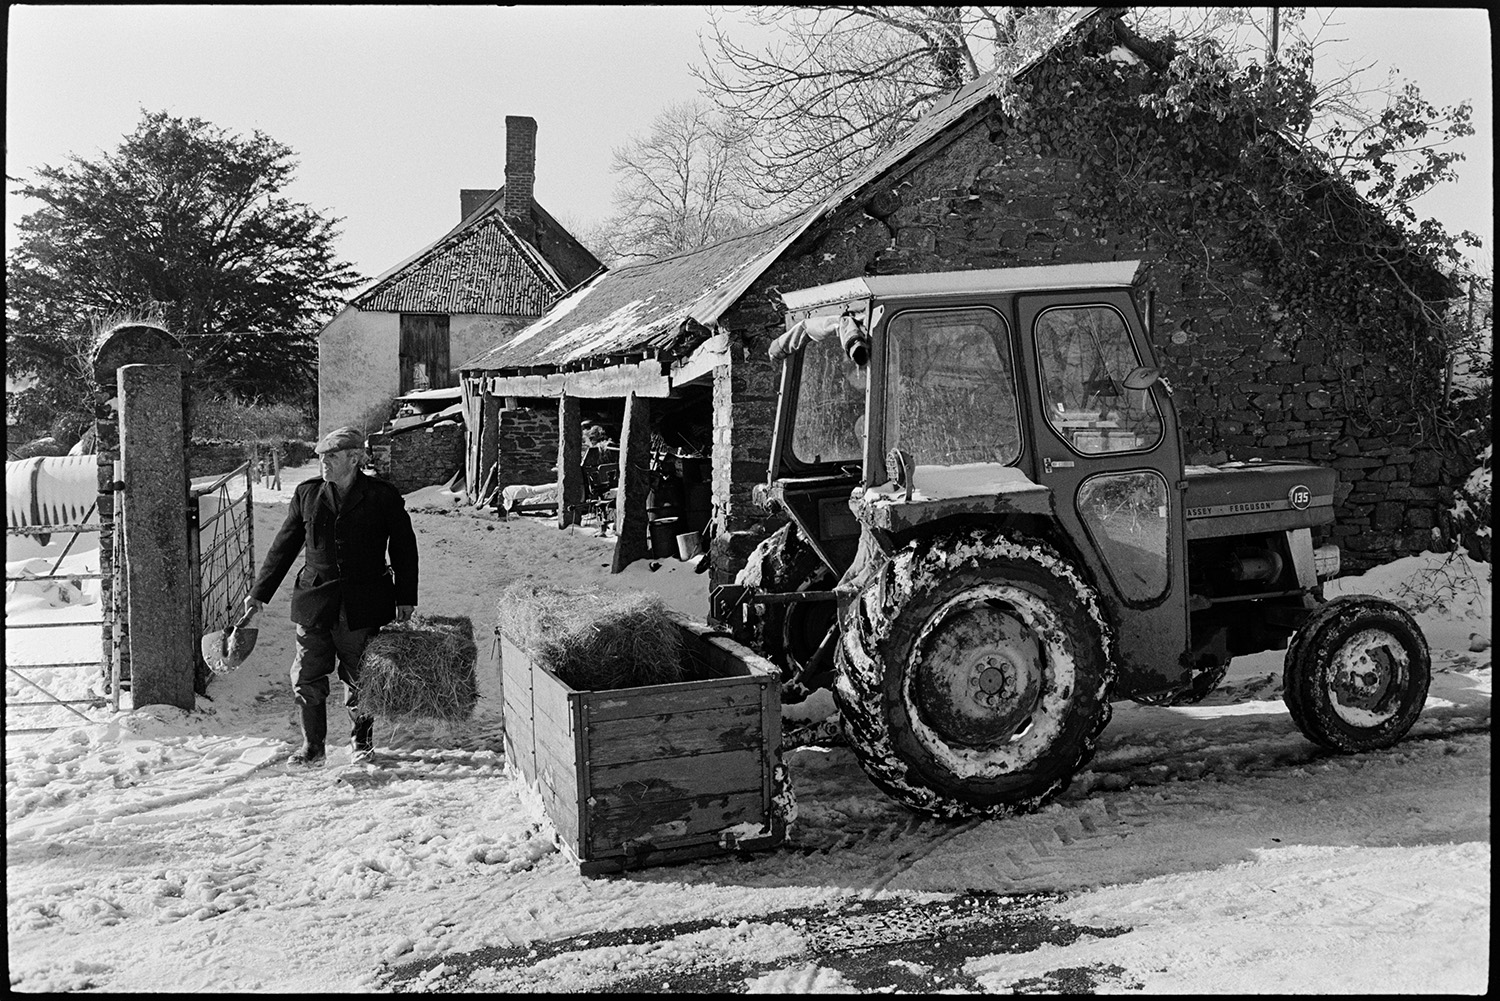 Snow, farmer feeding sheep with tractor and link box, carrying hay in wood, bright sun, snowdrift. 
[Alf Pugsley loading hay bales into a link box attached to a tractor, by a barn at Lower Langham, Dolton. He is taking to hay to feed to sheep and is also carrying a spade. The ground is covered with snow.]